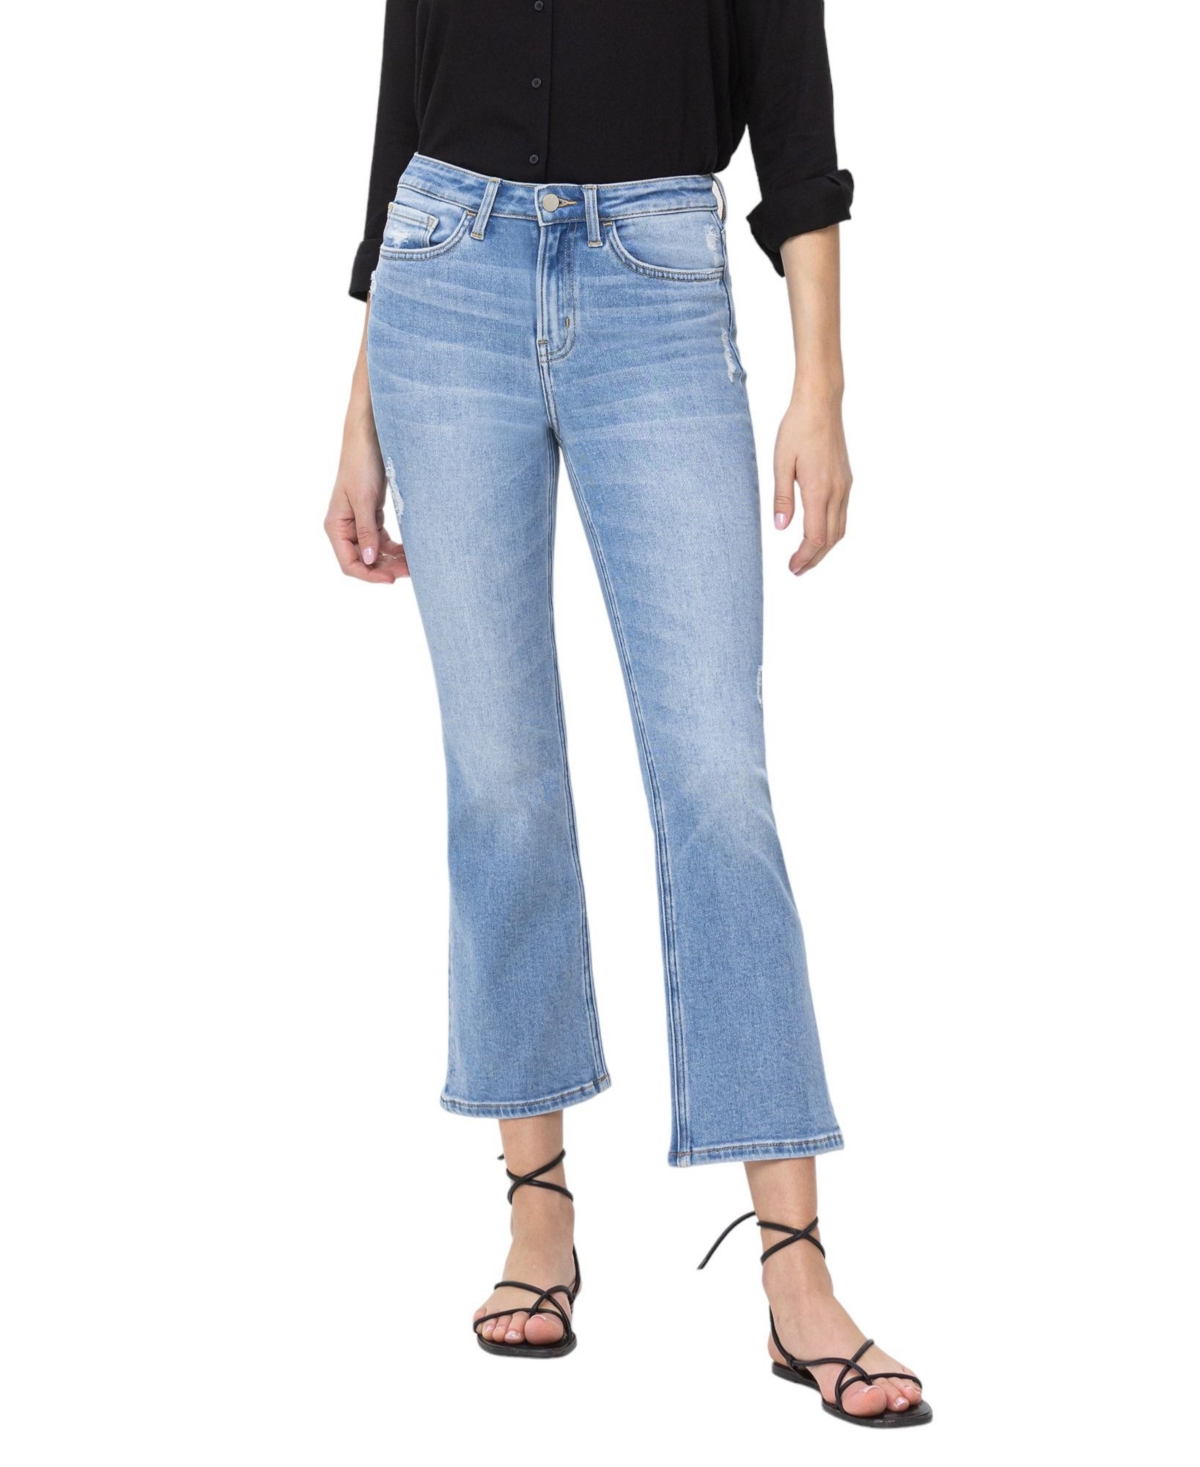 Women's High Rise Cropped Flare Jeans - Sprightly blue